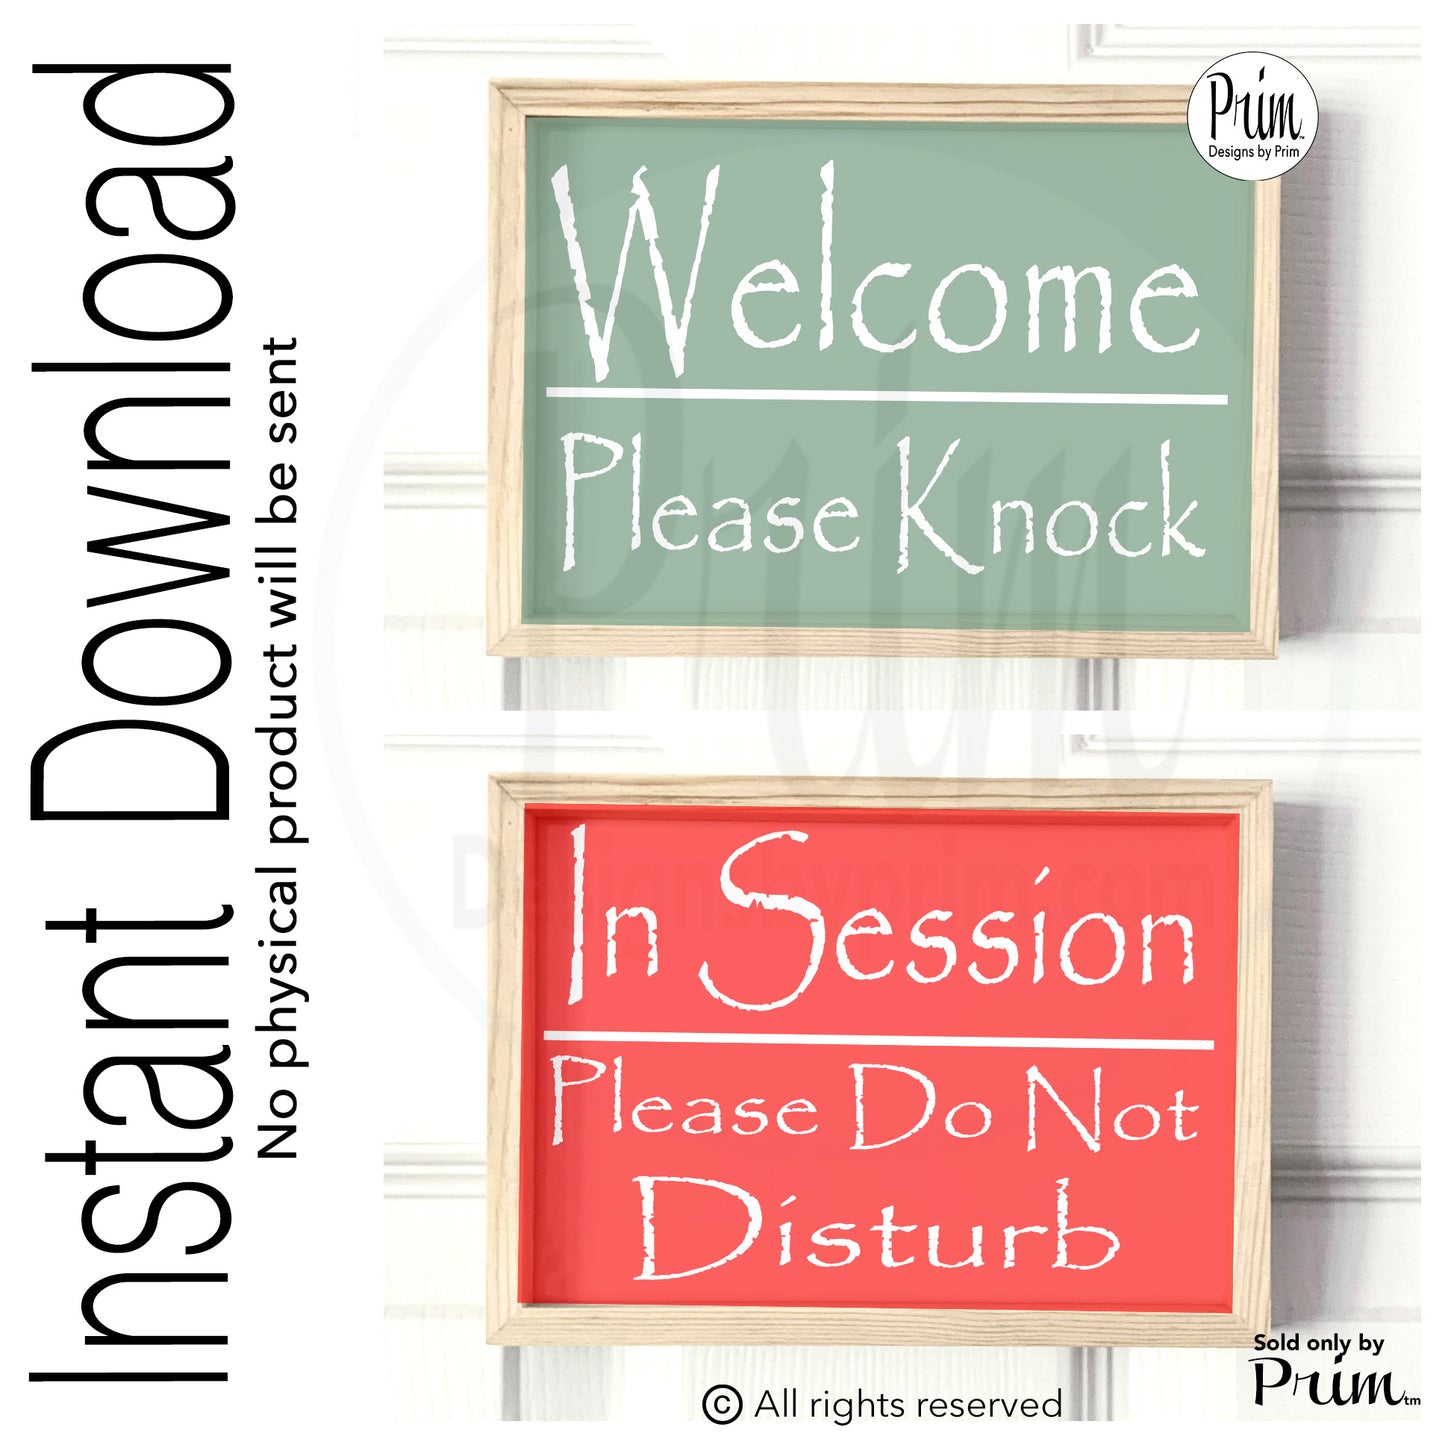 Designs by Prim Welcome Please Knock In Session Please Do Not Disturb Digital Prints | Instant Download Unavailable Office Business Counselor Therapist Busy